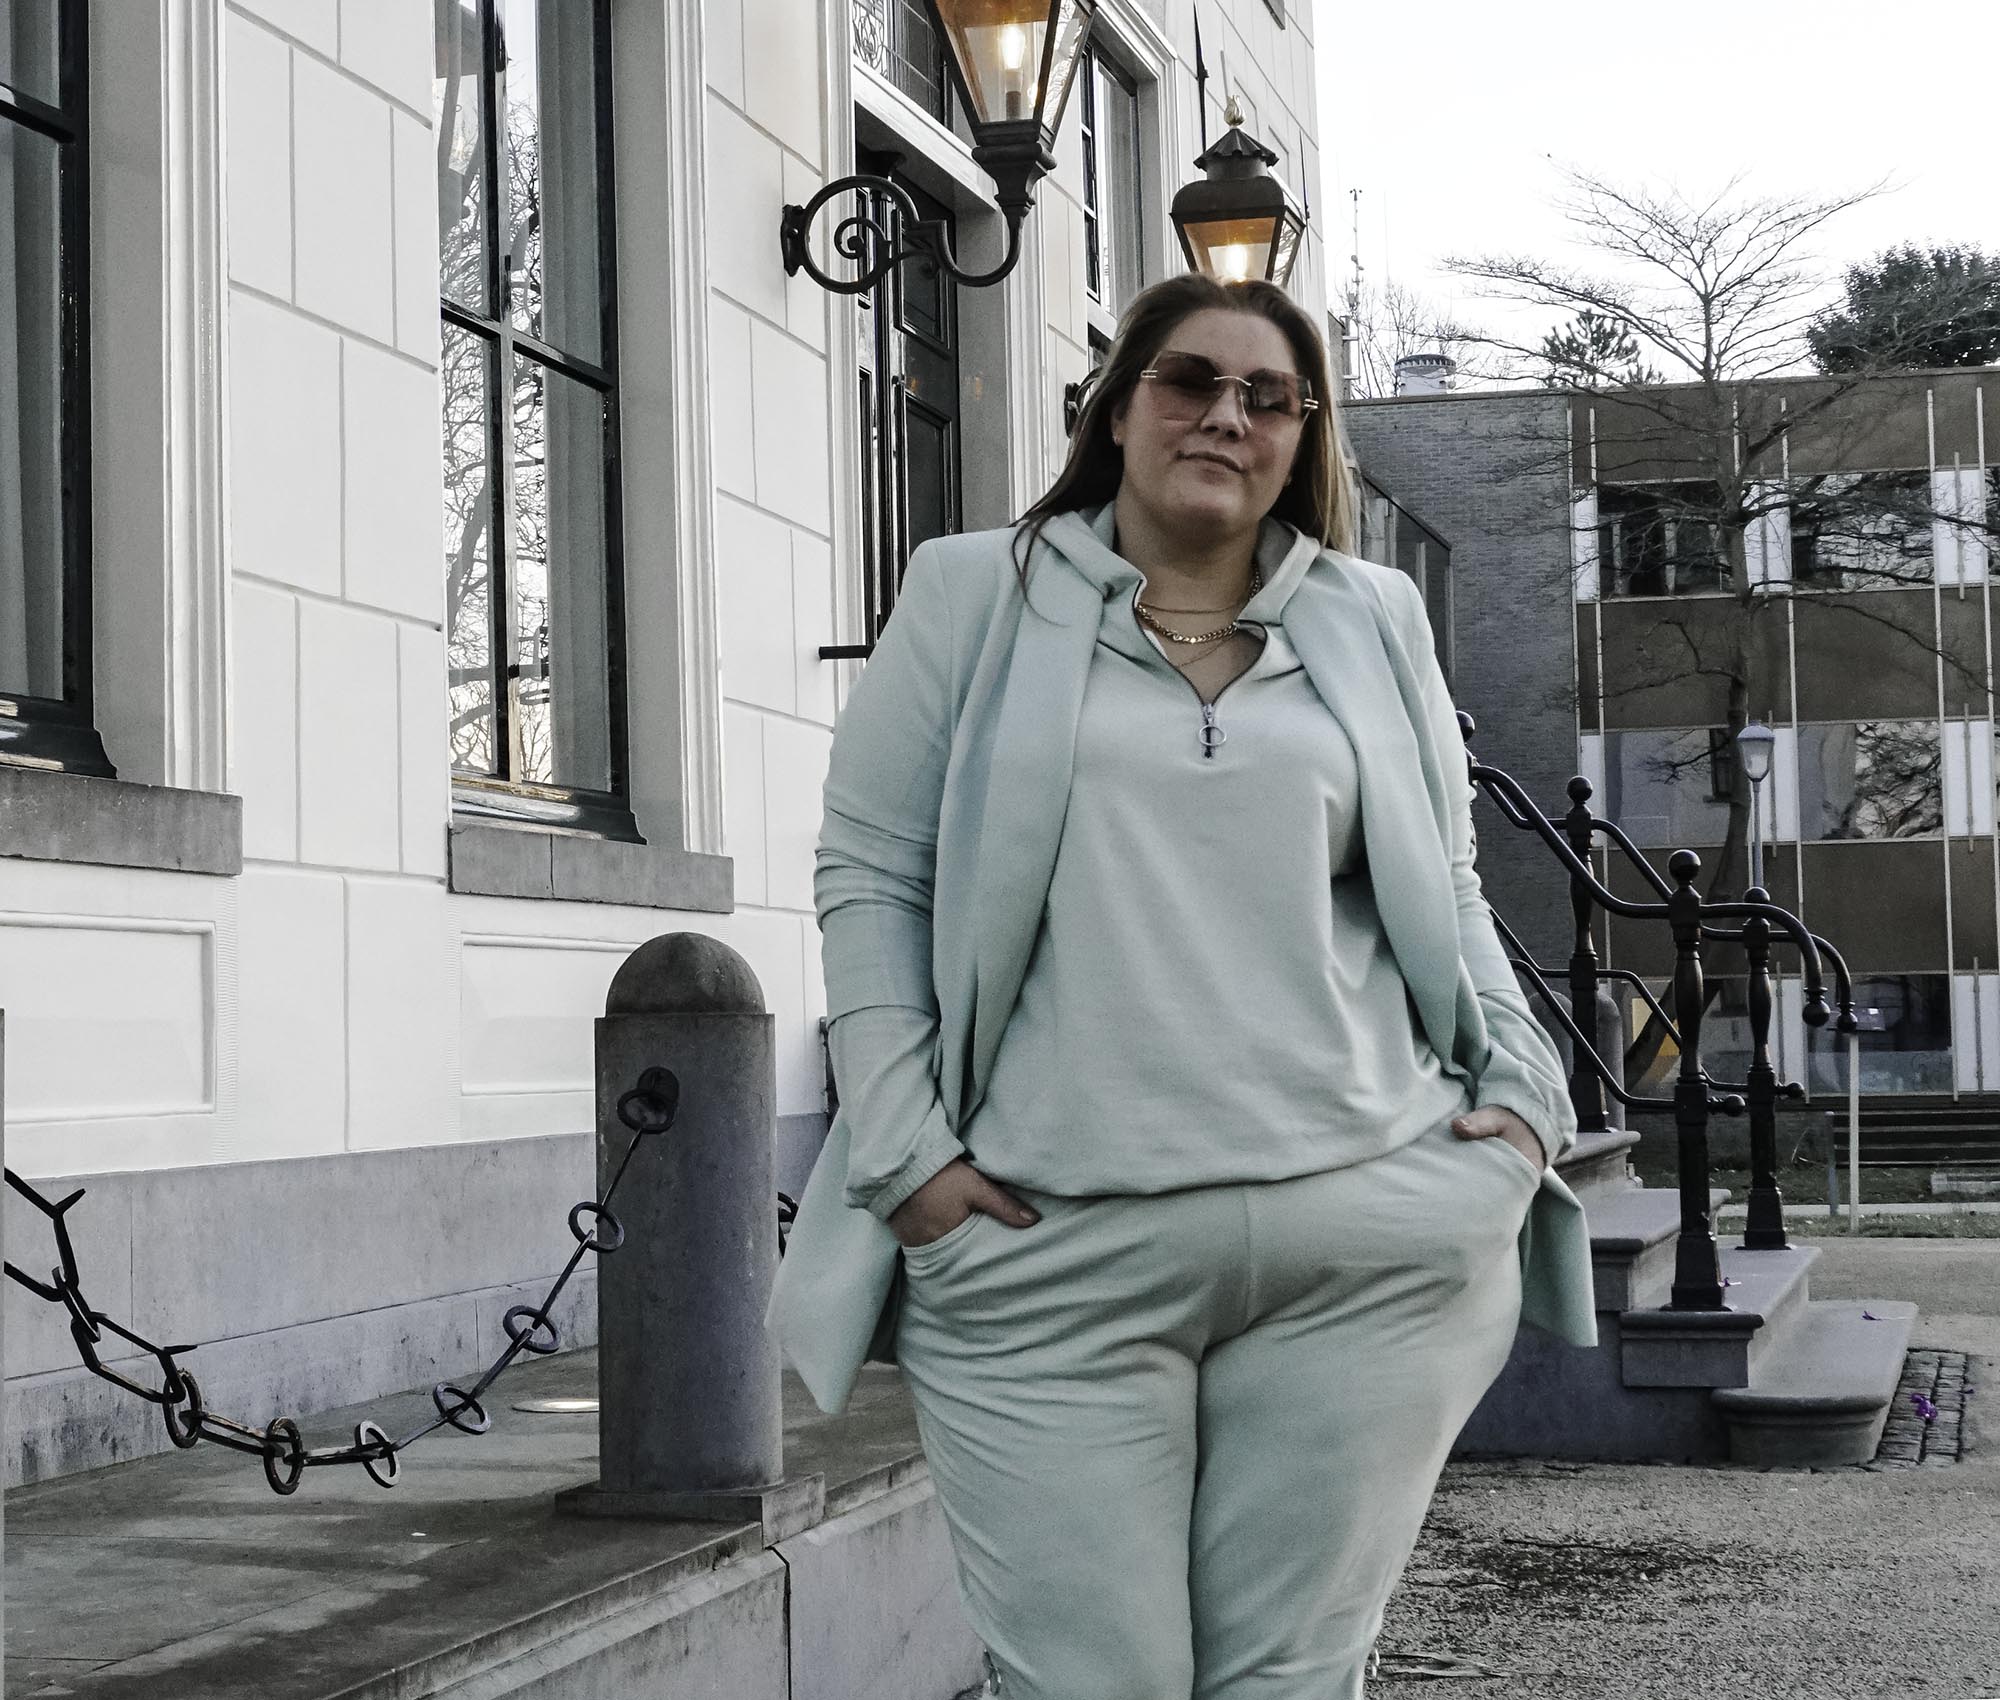 thebiggerblog, Josine Wille, happy size, maat 48, maat 50, size 20, size 22, plussize fashion blog, mode blog, grote maten mode, ton sur ton, ton-sur-ton, fashion trend 2021, lente trends 2021, spring 2021, casual outfit with blazer, sportief met blazer, joggers met rits, zipper at outseam, Sara Lindholm, angel of style, budget plussize fashion, saliegroen, sage green, fashion color trend, sage ton sur ton, outfit geheel in dezelfde kleur, body confidence, body positive, body positivity, self confidence, shop your shape, mintgroen, joggingpak, pastel